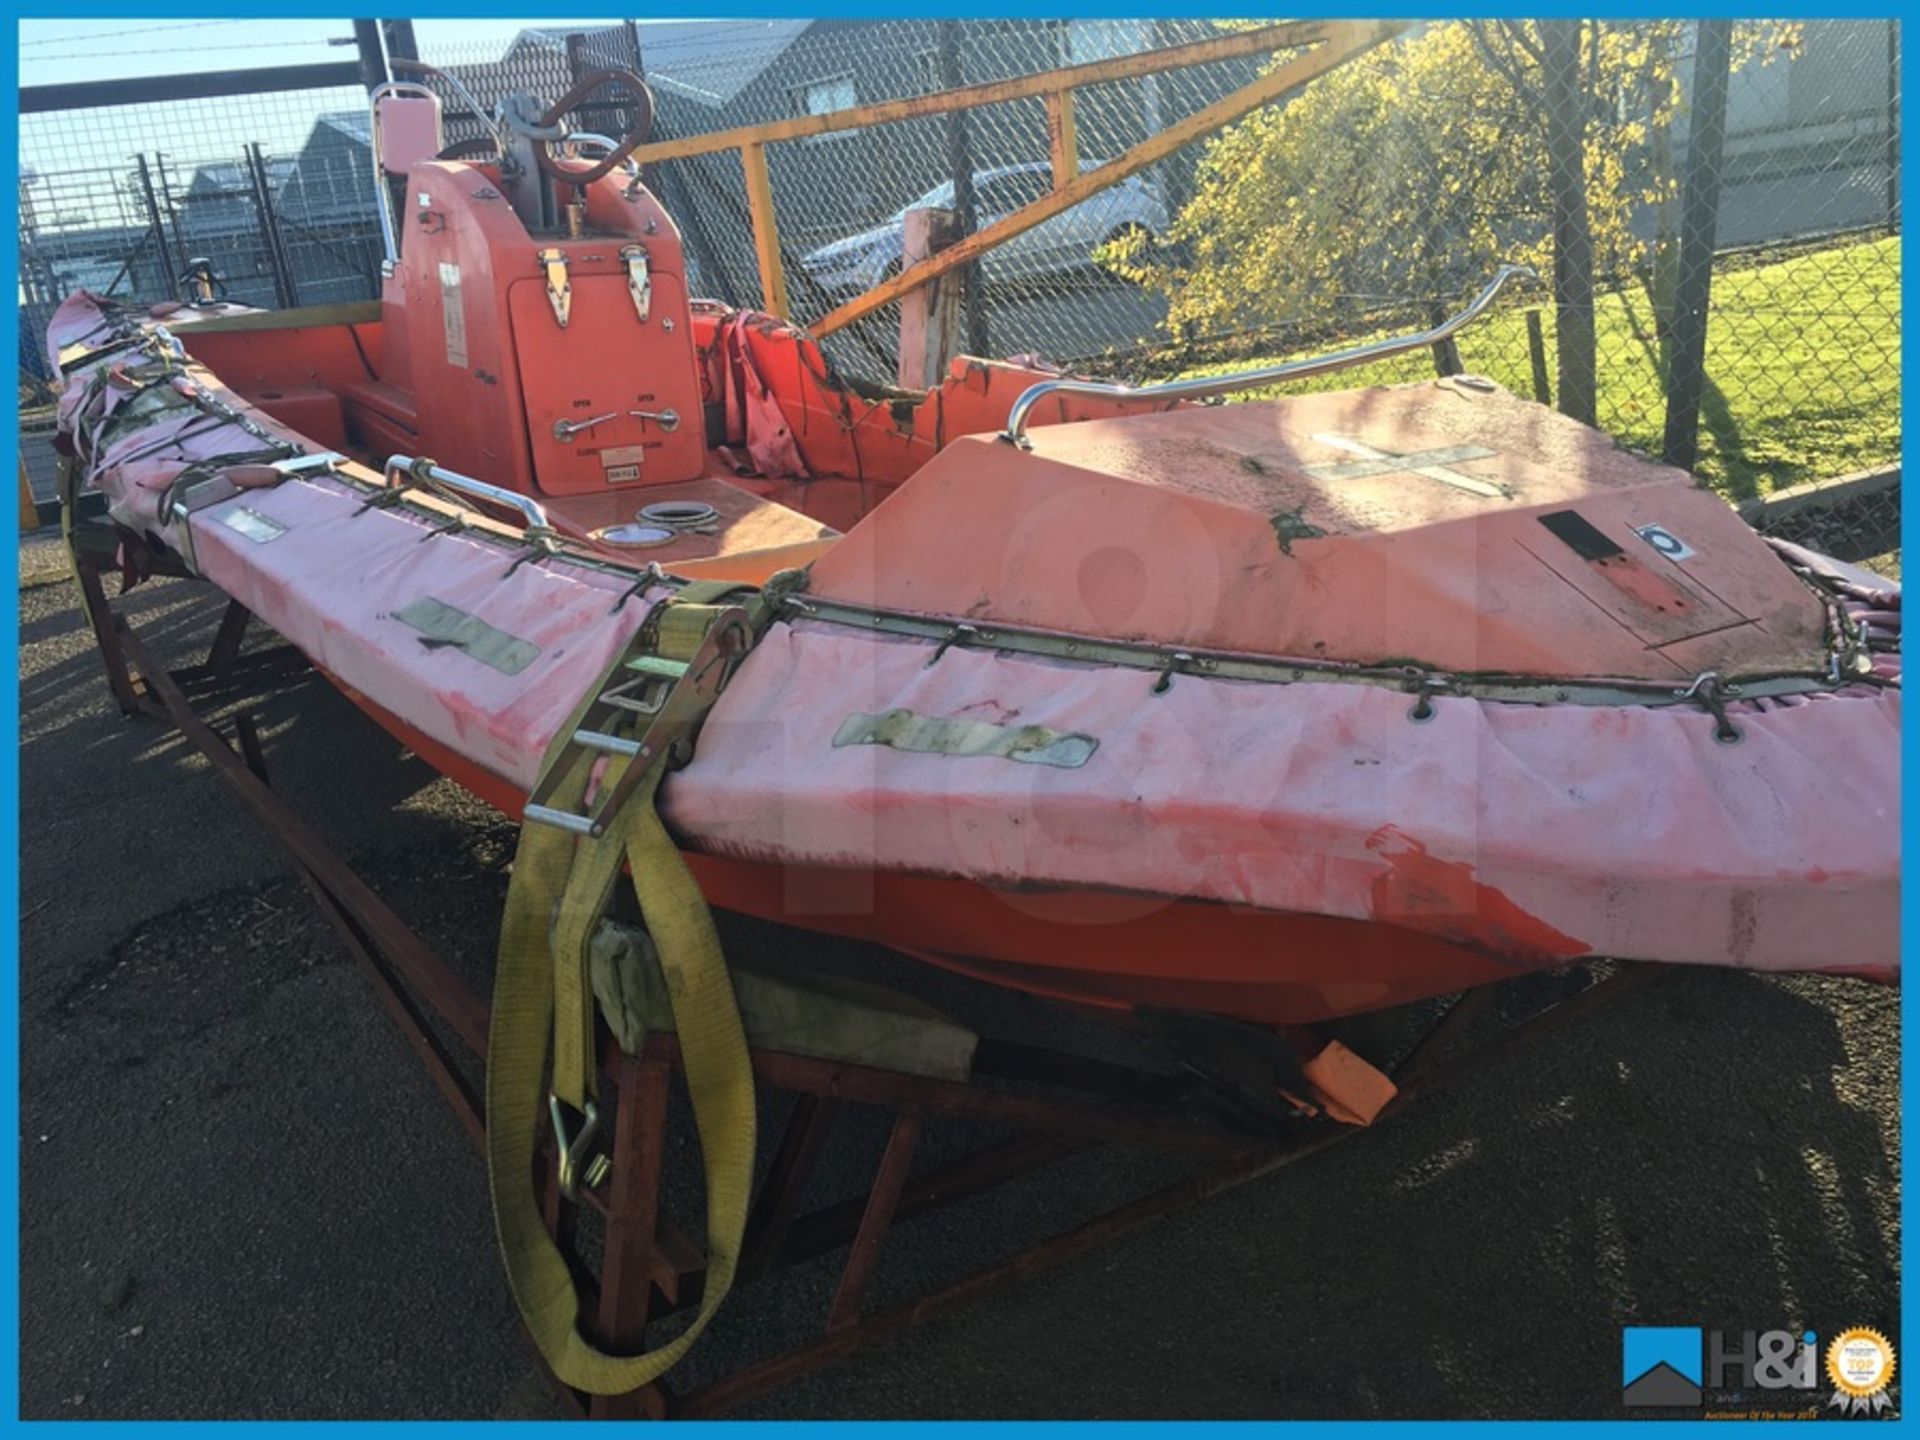 FRP FADT rescue boat 6.10m long. 1671kg. Type GJ6.10. 8 x person, has body damage to side top edge